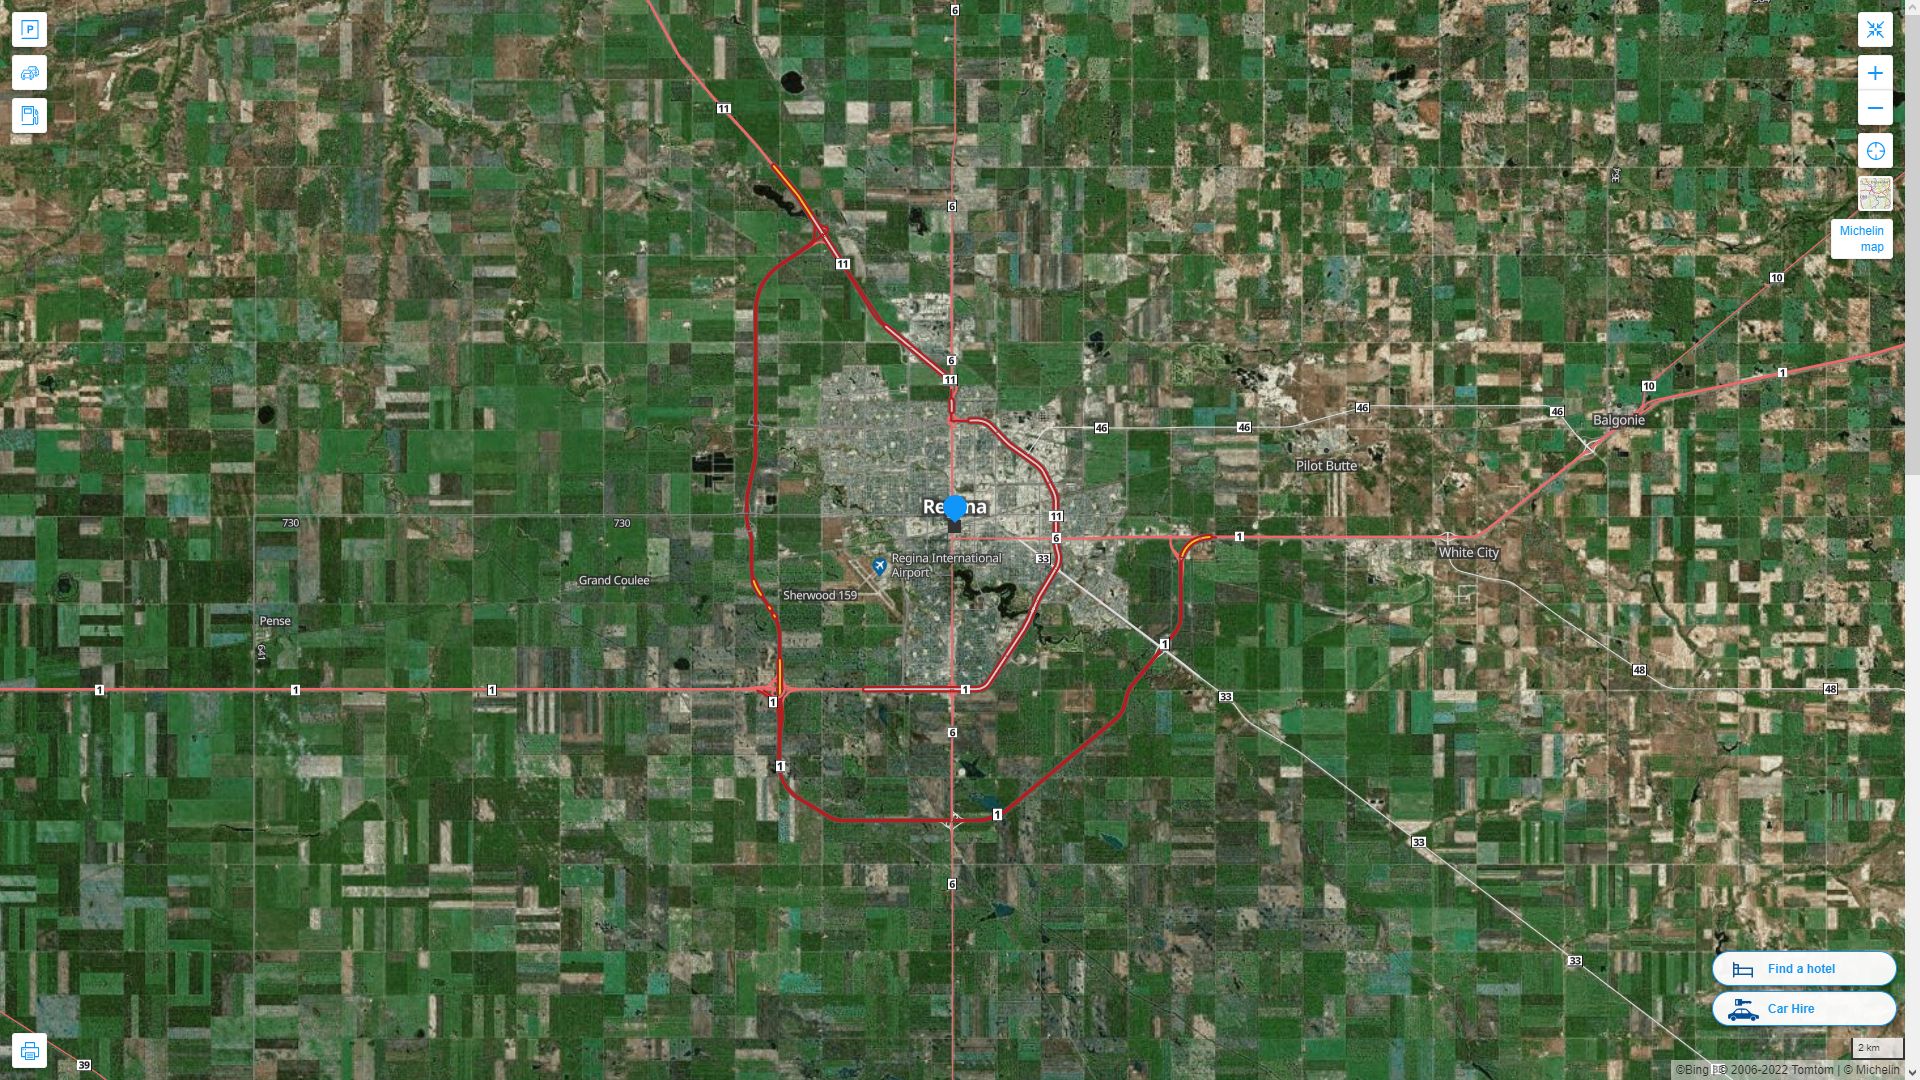 Regina Highway and Road Map with Satellite View